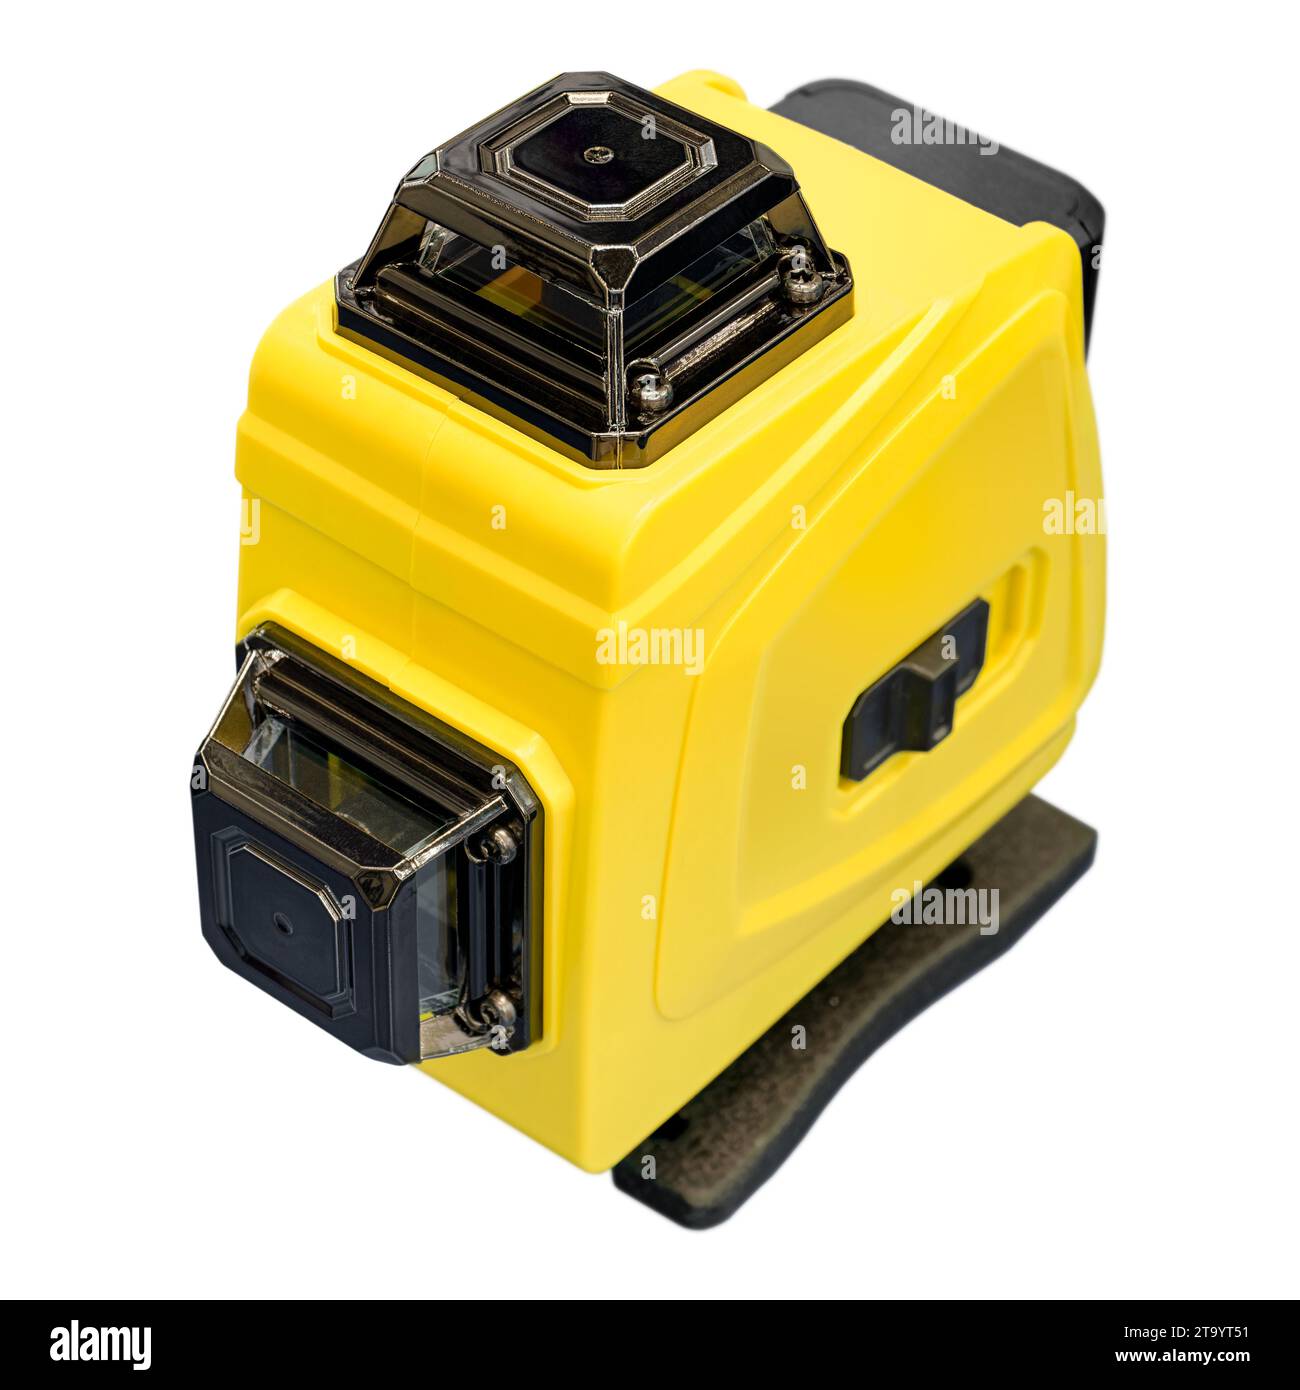 Generic yellow professional laser level, control tool, isolated on white background Stock Photo